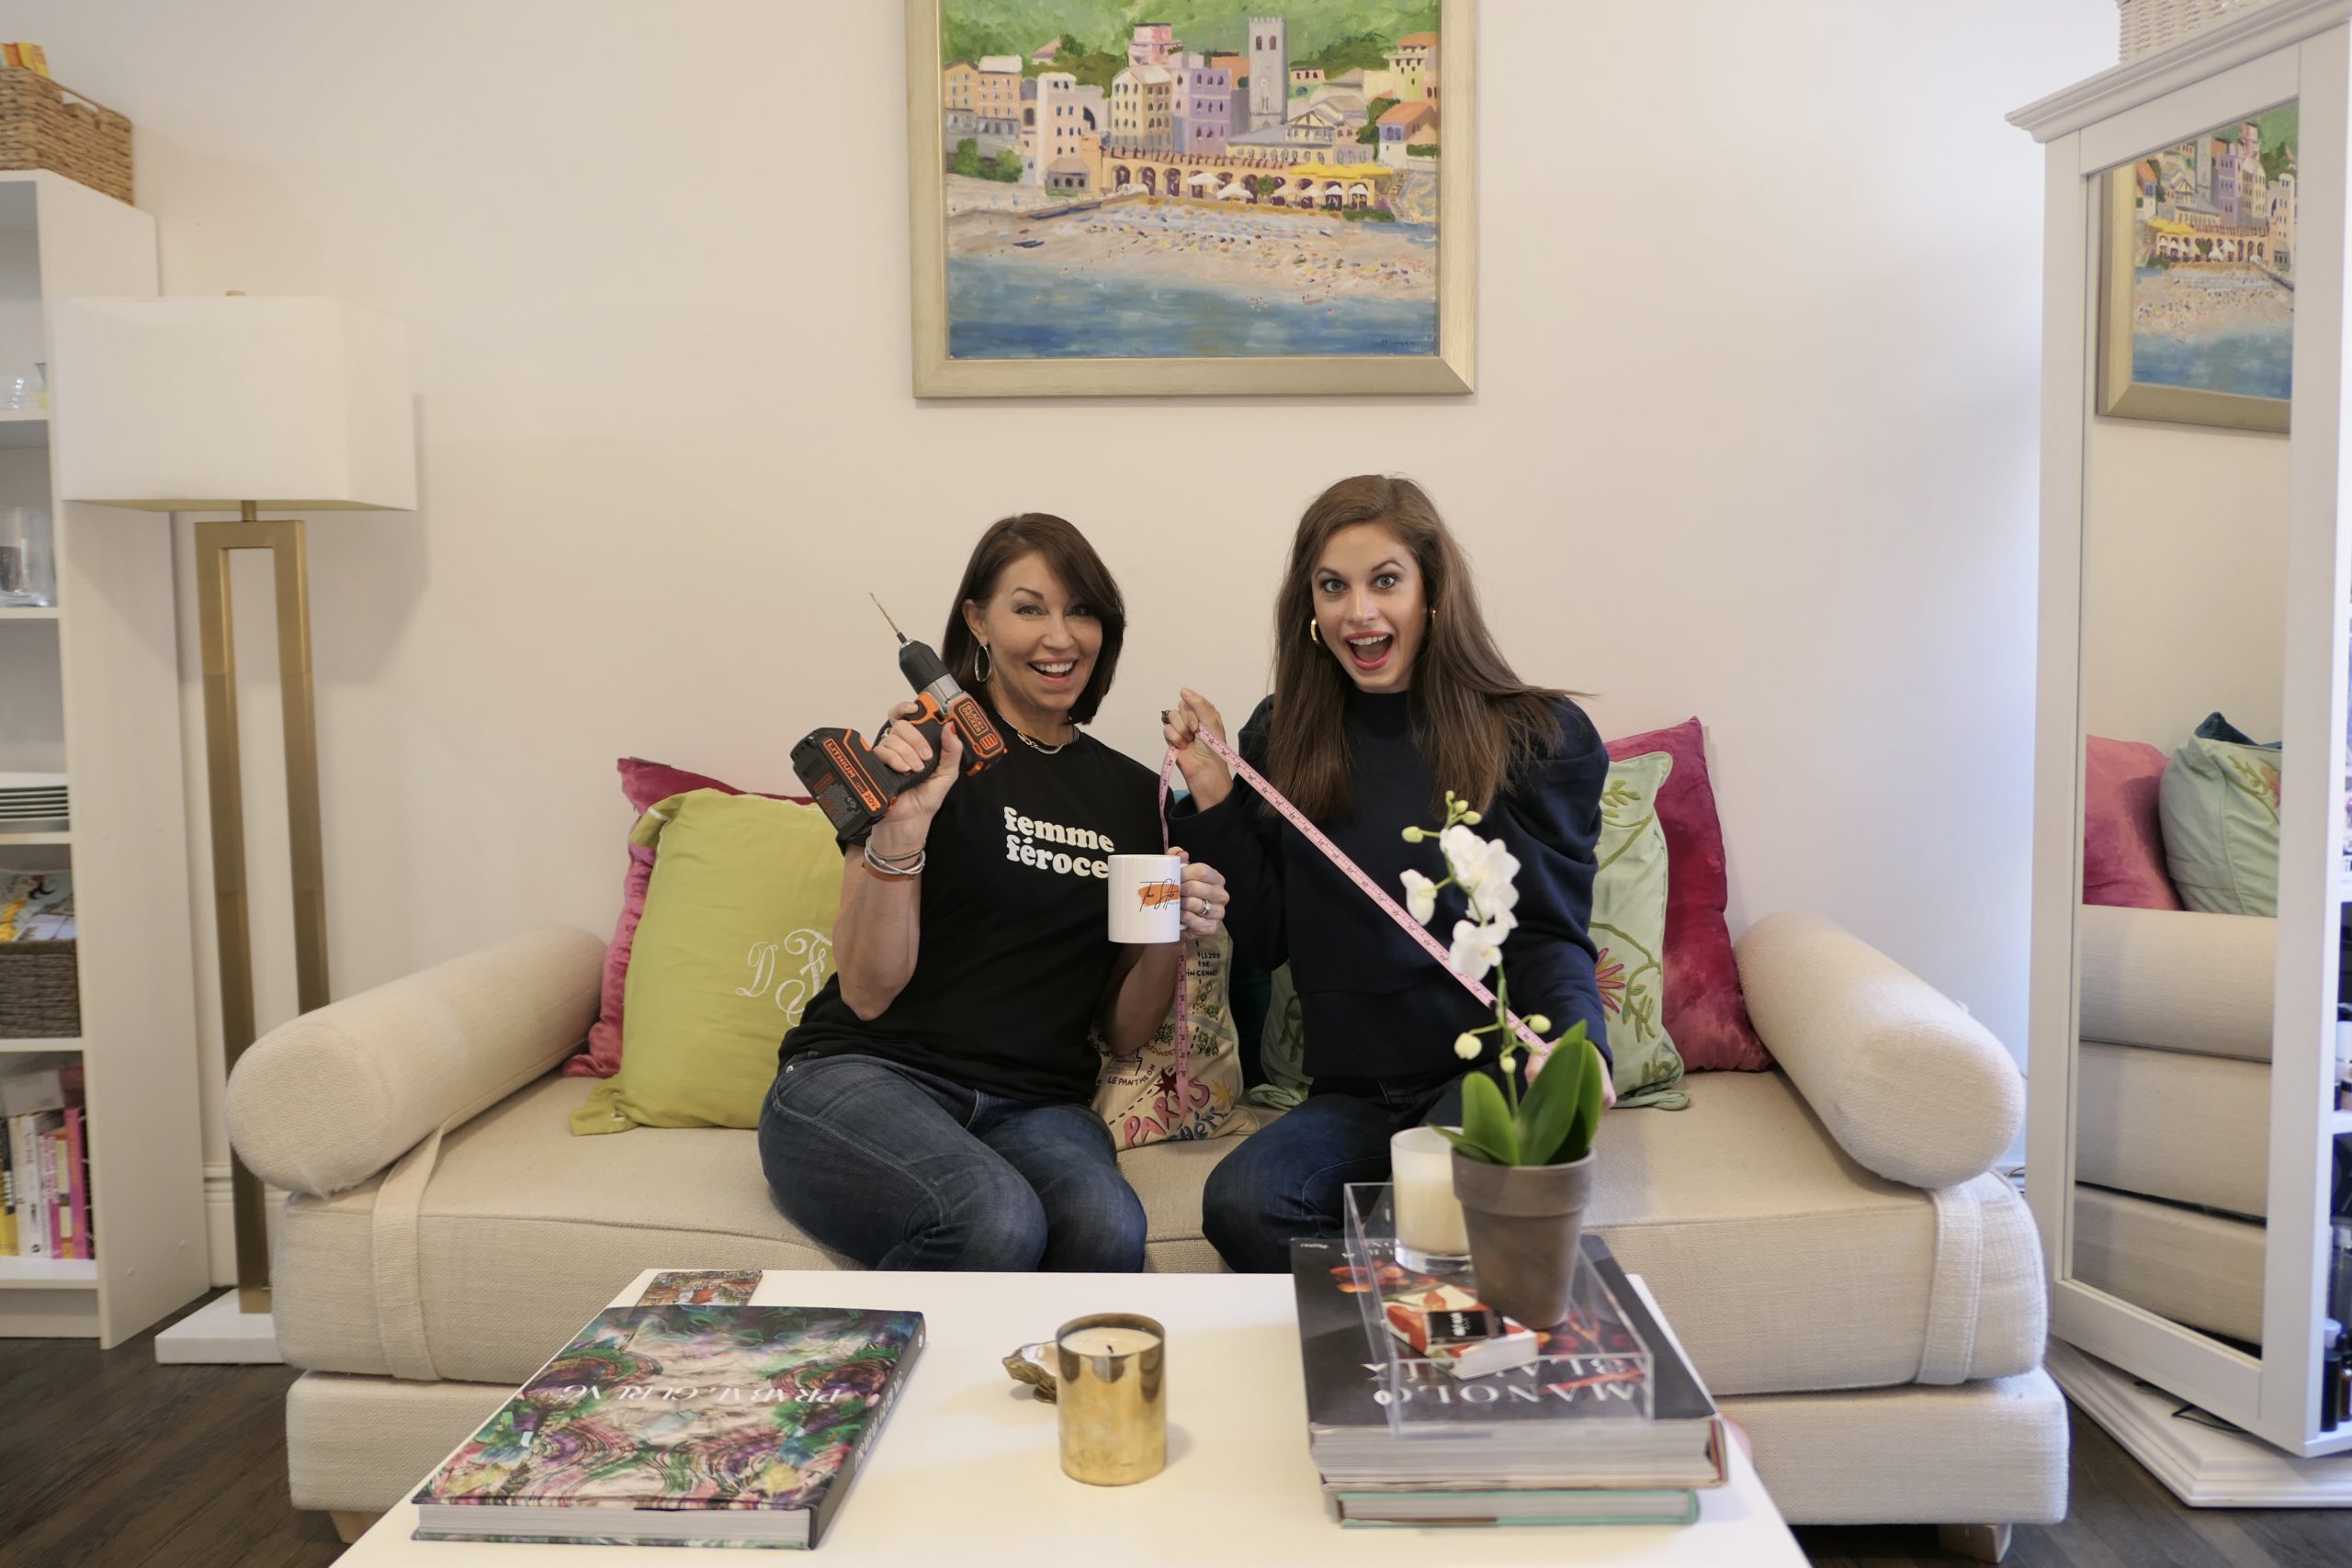 Two women both with brown hair sitting on a couch holding tools, one wears a black tee and jeans, the other wears a sweatshirt & jeans.